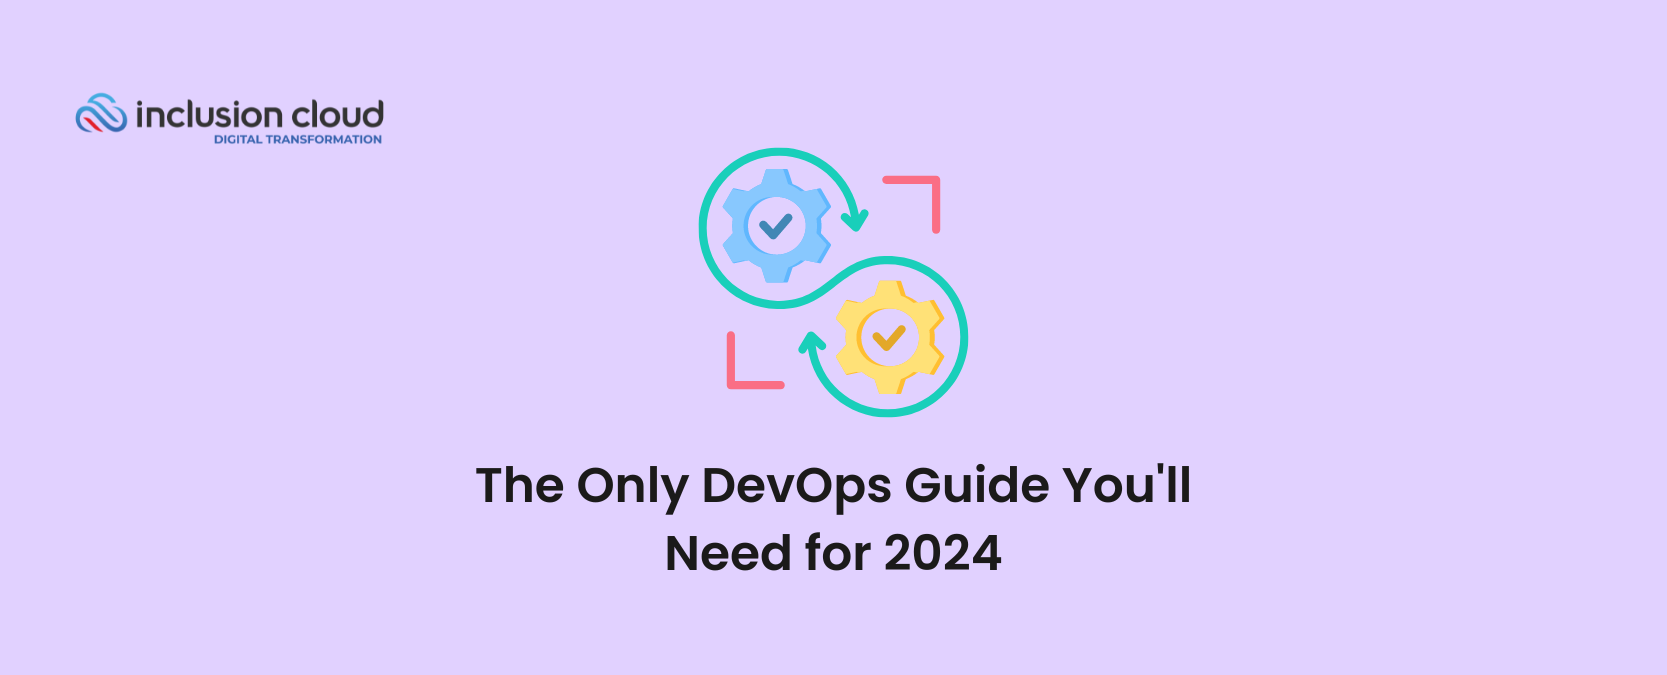 The Only DevOps Guide You'll Need for 2024